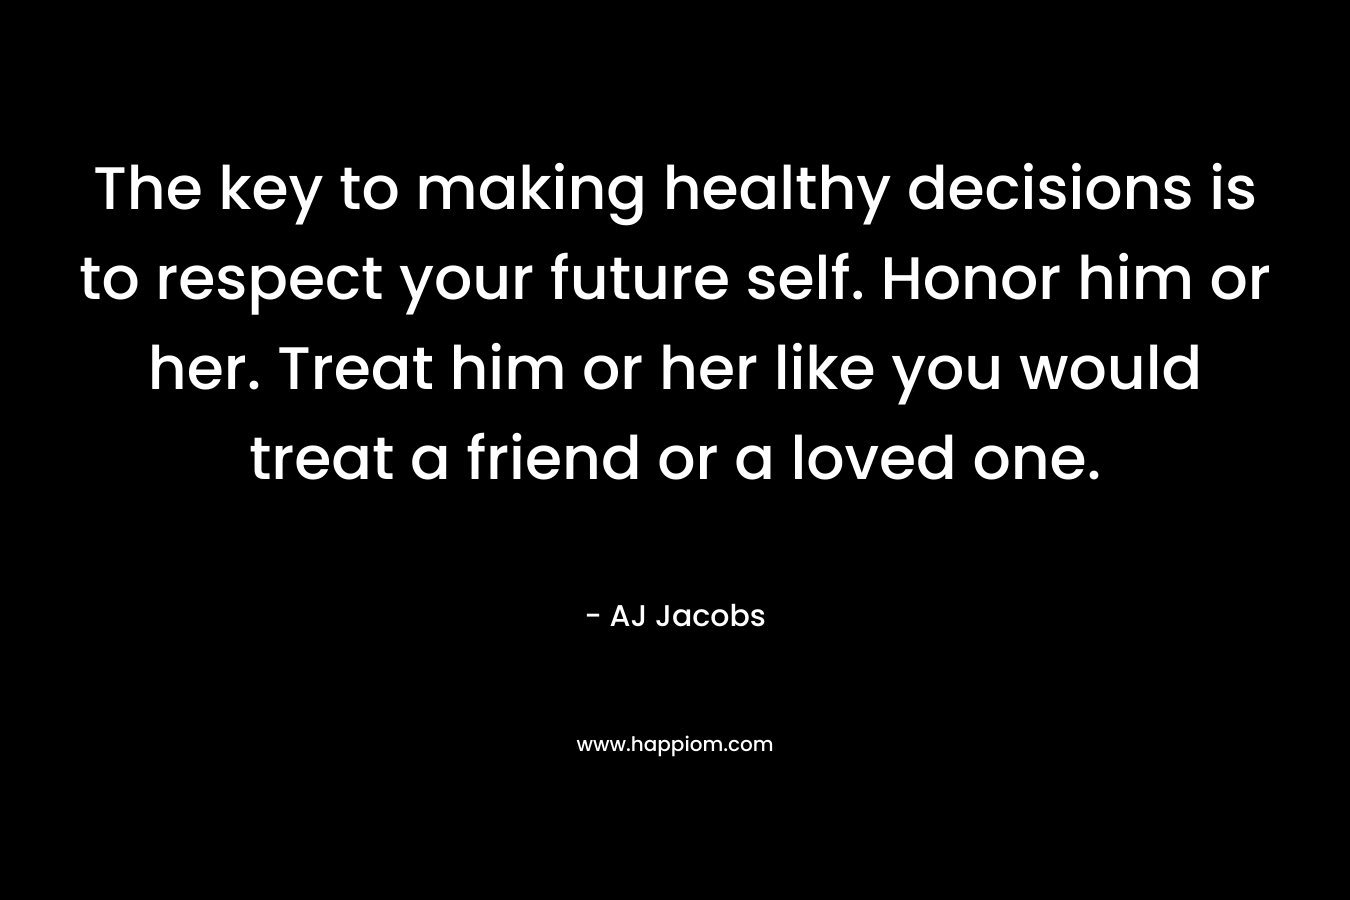 The key to making healthy decisions is to respect your future self. Honor him or her. Treat him or her like you would treat a friend or a loved one.